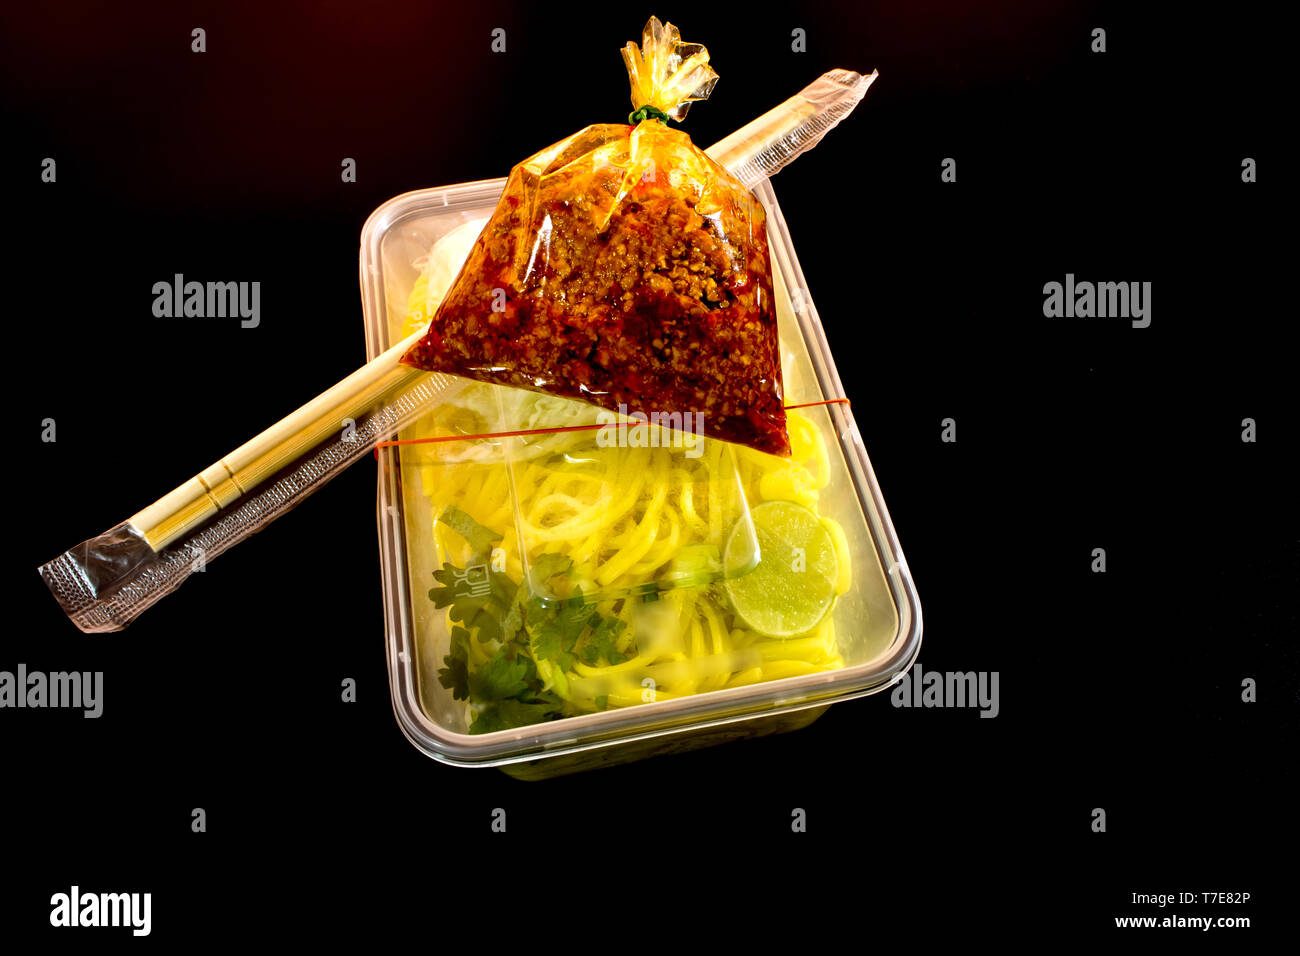 Spaghetti with sauce Take home food in plastic packaging Stock Photo